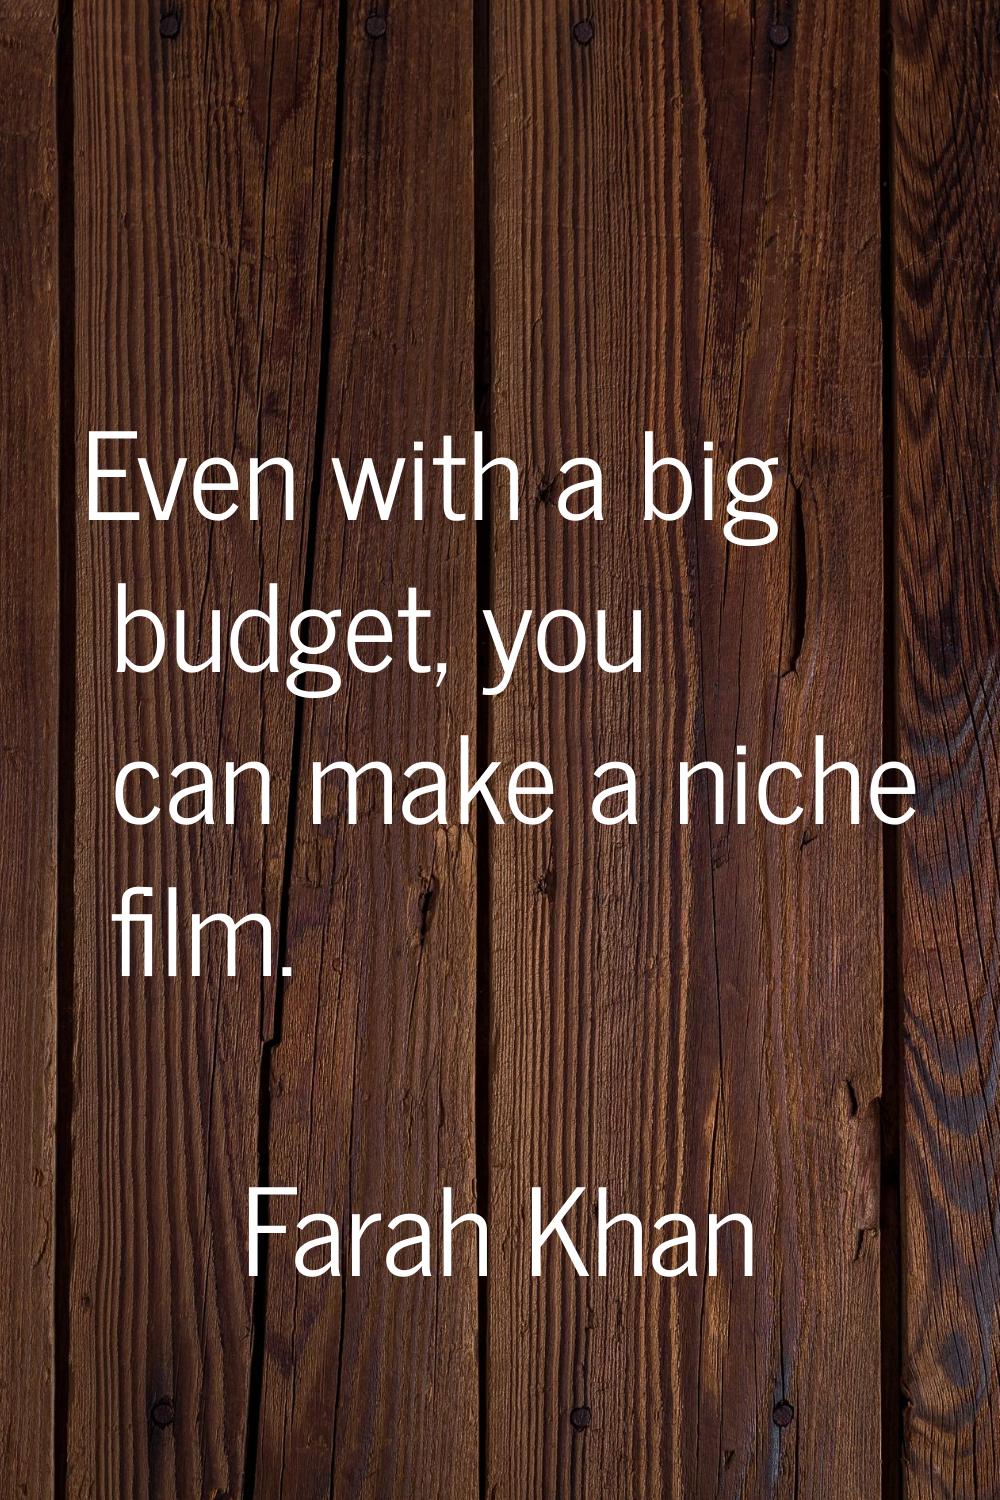 Even with a big budget, you can make a niche film.